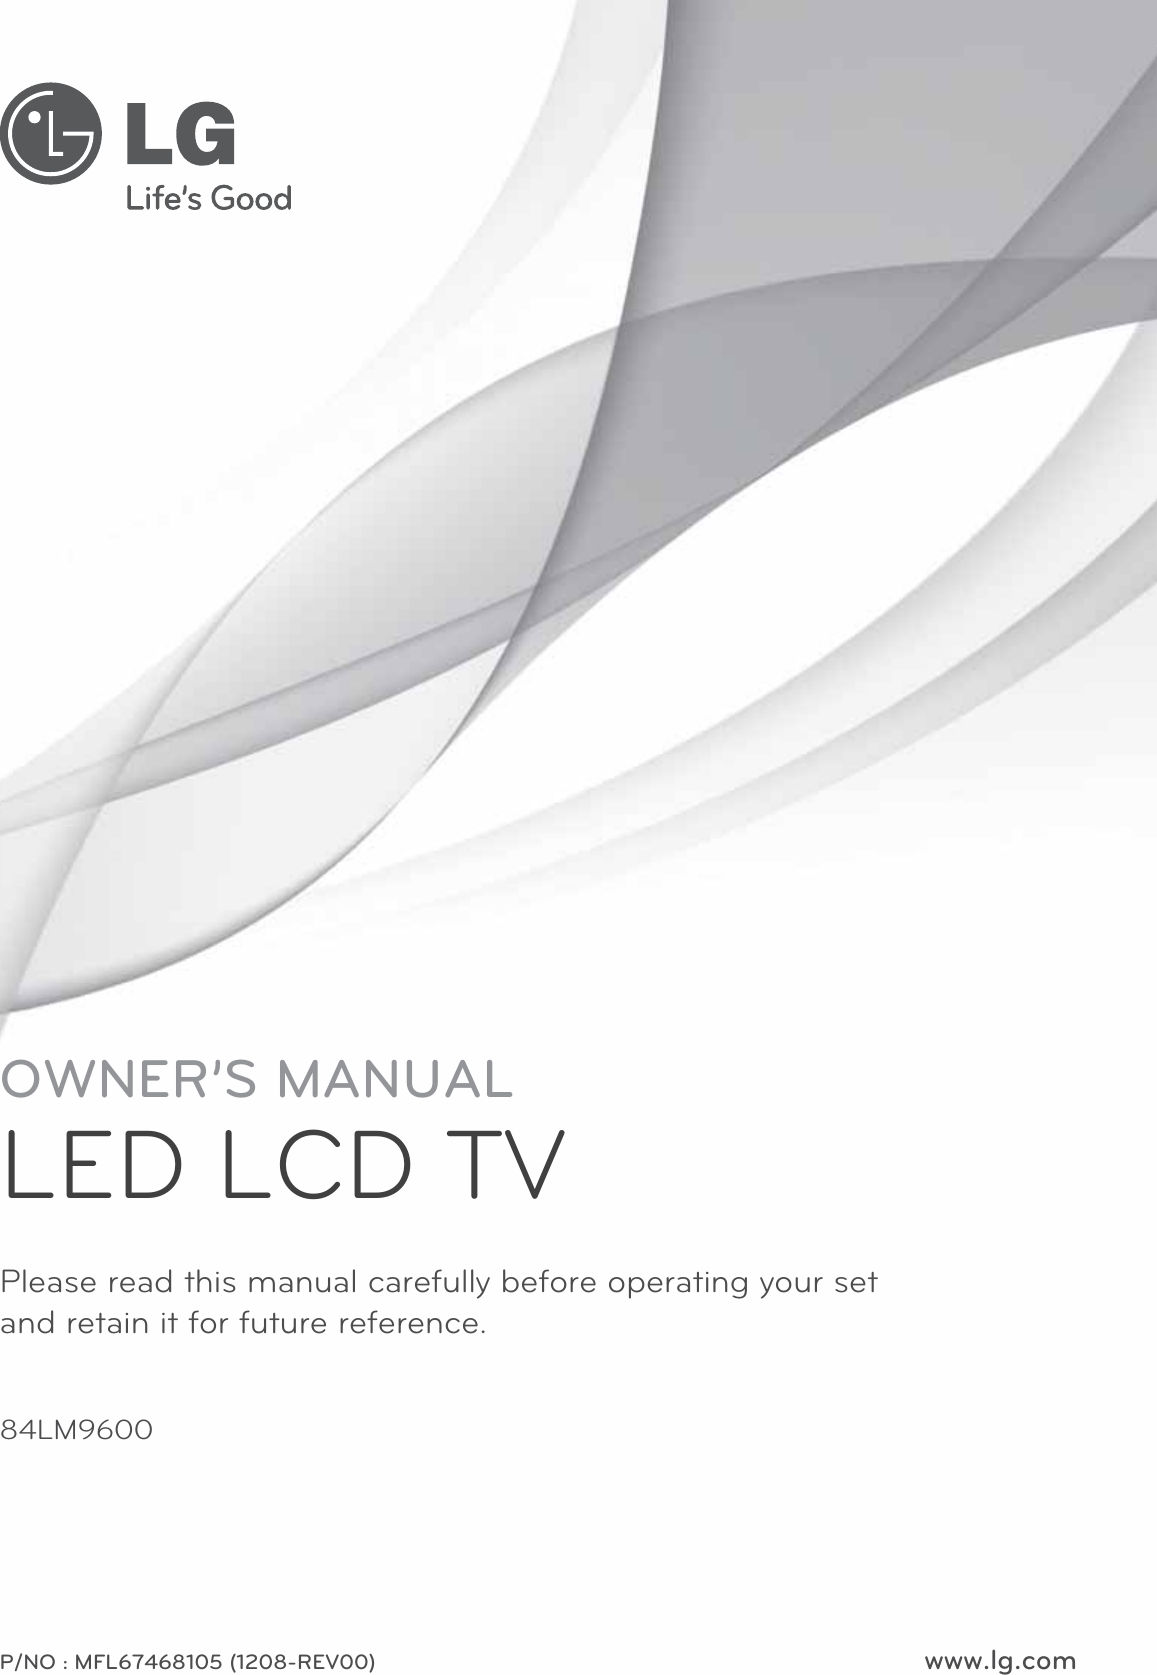 www.lg.comPlease read this manual carefully before operating your set  and retain it for future reference.P/NO : MFL67468105 (1208-REV00)OWNER’S MANUALLED LCD TV84LM9600